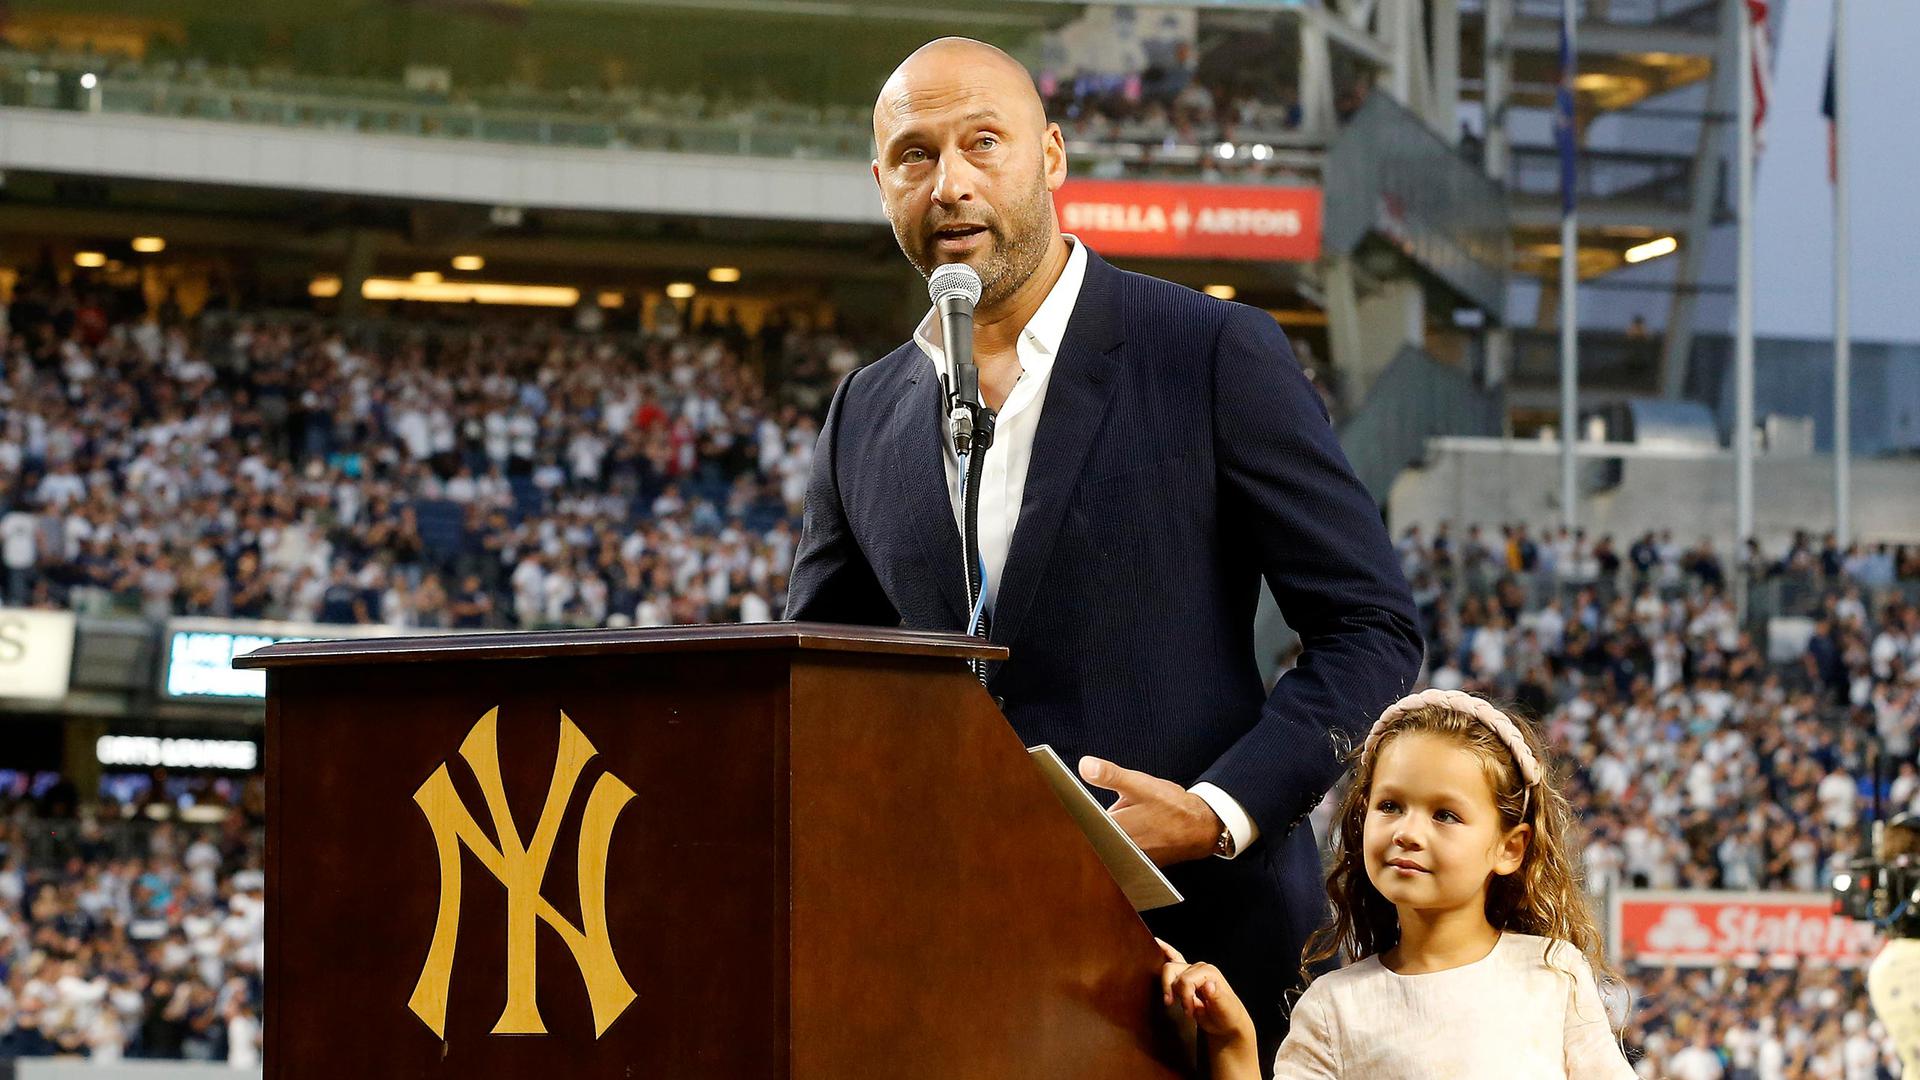 Derek Jeter speaks at a podium with his daughter standing beside him